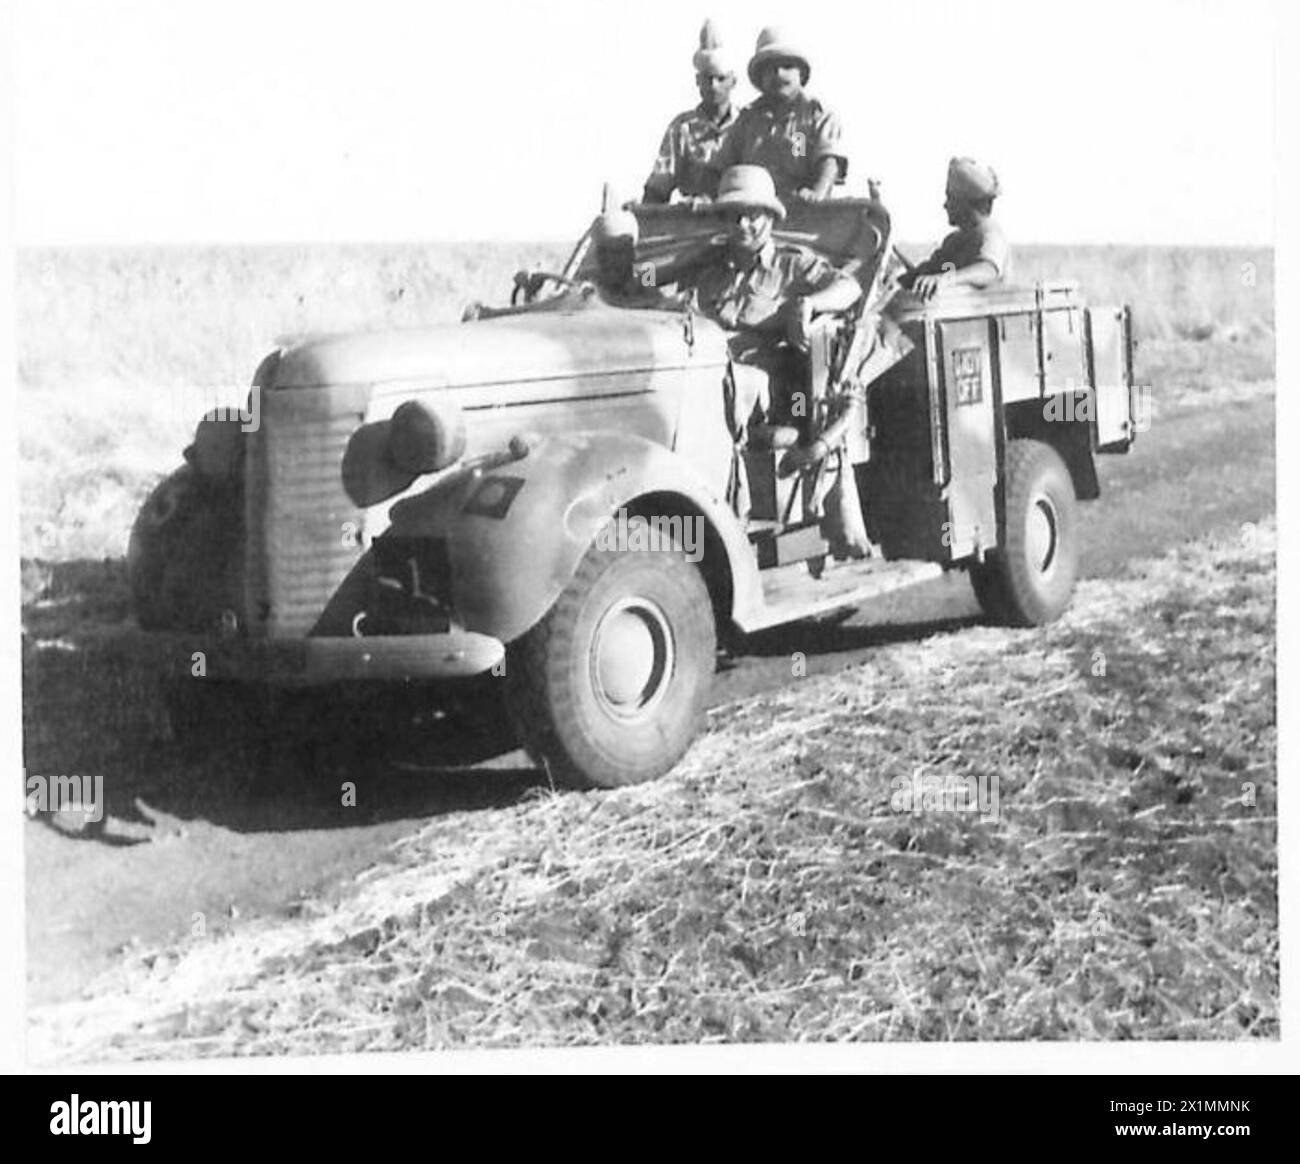 THE BRITISH ARMY IN NORTH AFRICA AND THE MIDDLE EAST 1940-1947 - On the road. Capt. ------ pictured in the Desert with his truck and staff, British Army Stock Photo